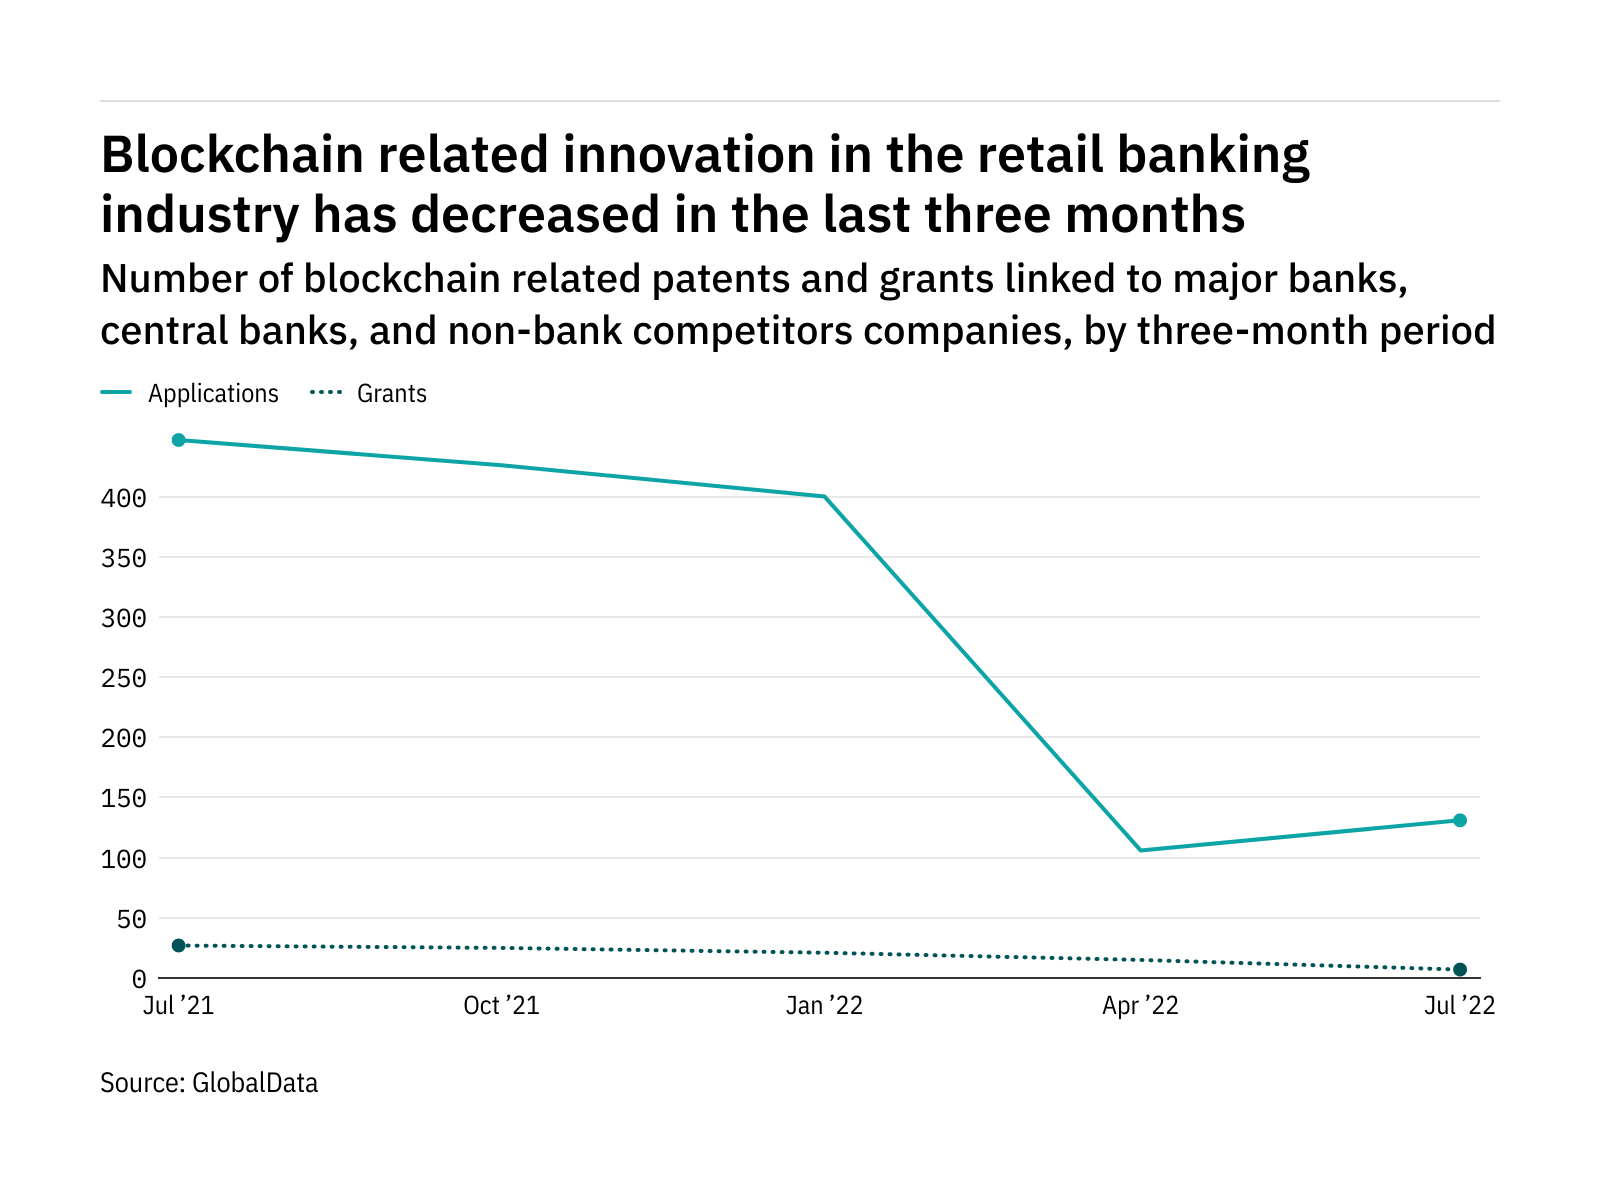 Blockchain innovation among retail banking industry companies has dropped off in the last year